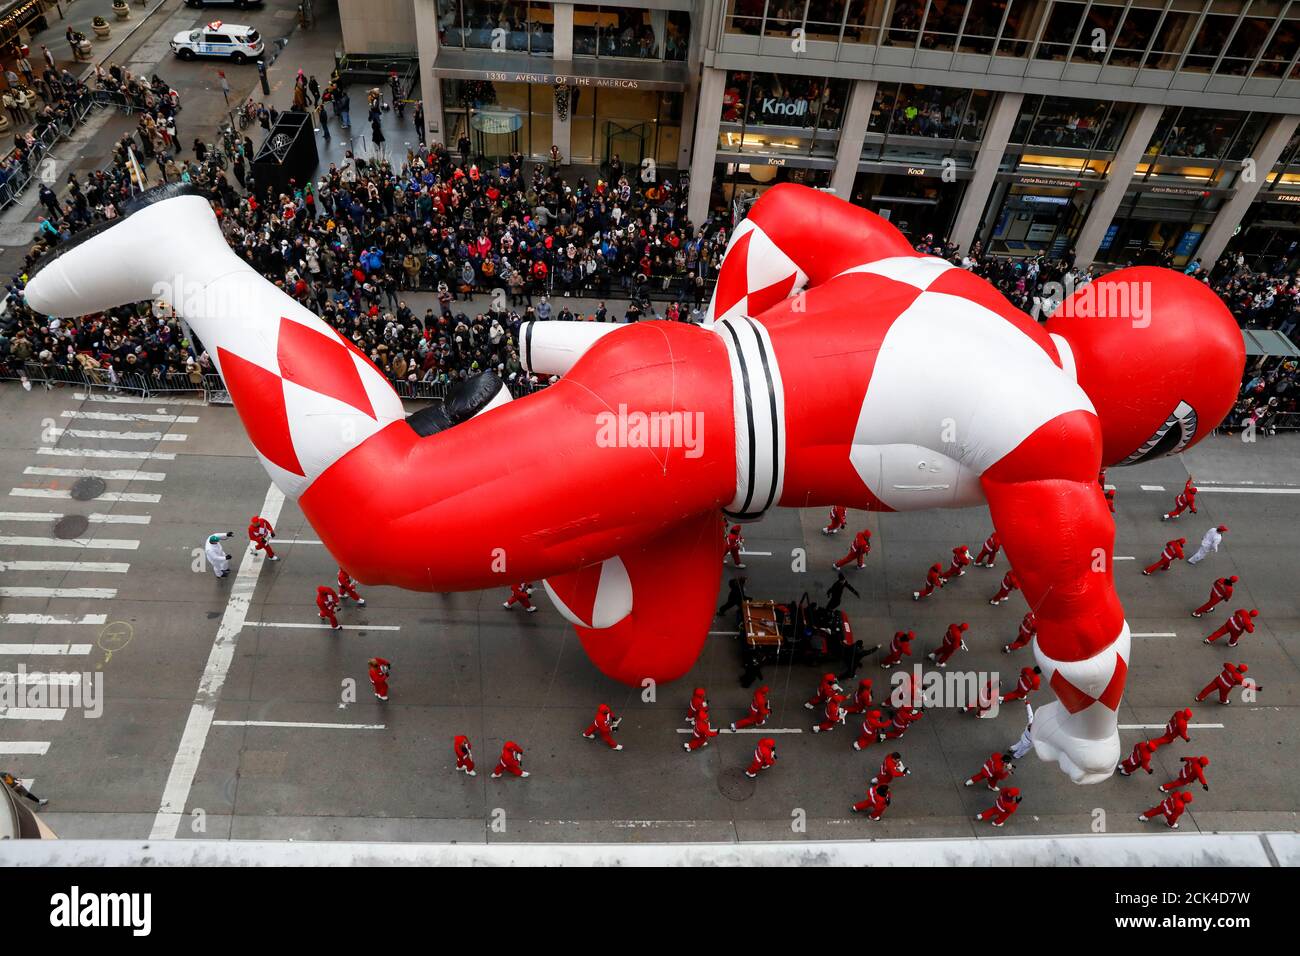 The Red Power Ranger balloon is carried during the 93rd Macy's Day Parade in New York, U.S., November 28, 2019. REUTERS/Brendan Mcdermid Stock Photo - Alamy